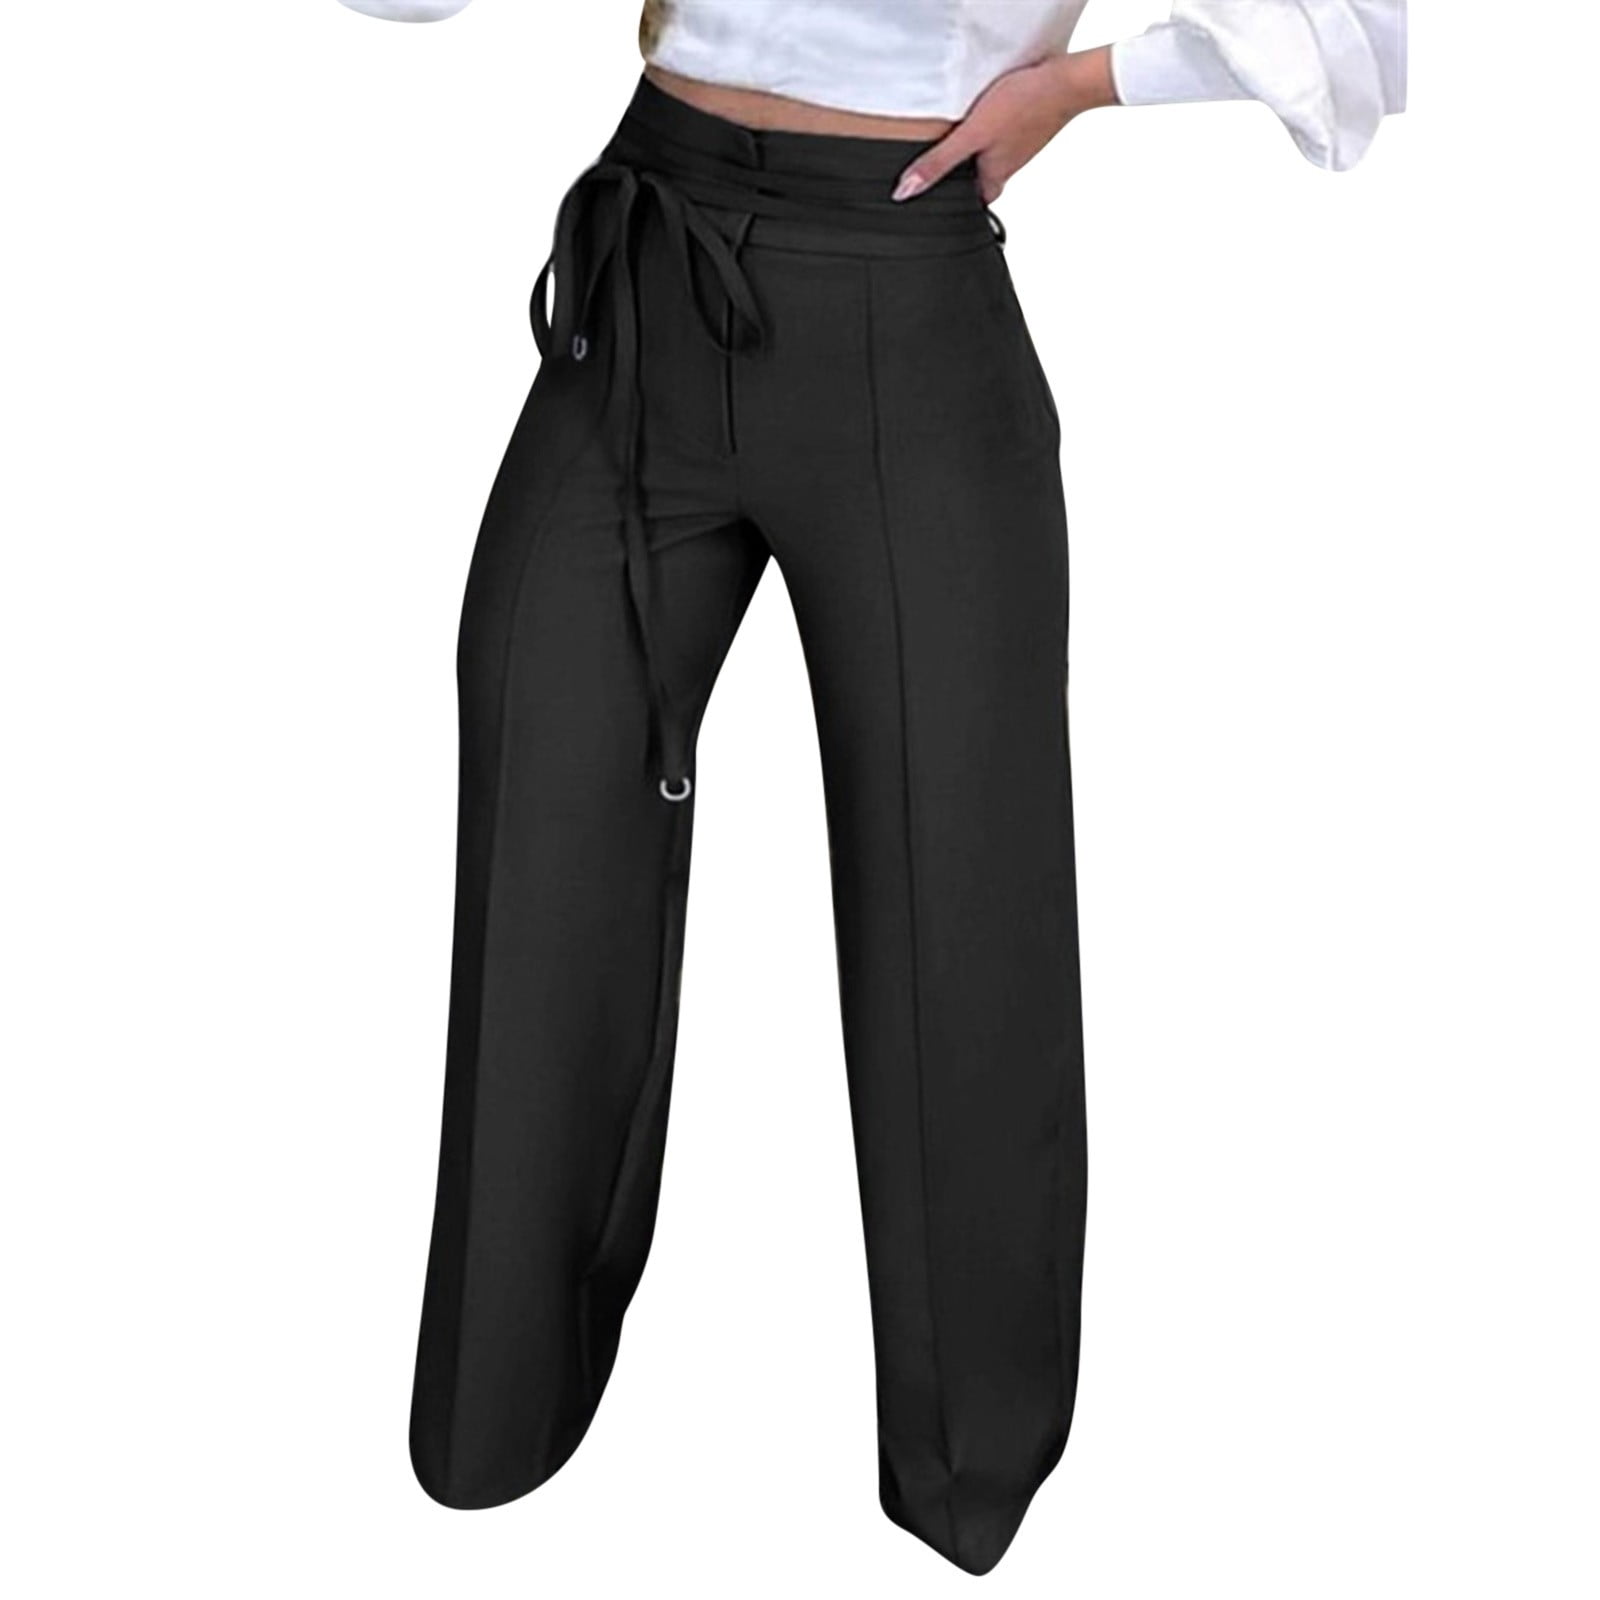 Cathalem Work Pants Women High Waisted Tummy Control Women's Ultra-Soft  Lounge Athletic Pants with Pockets(Black,L)